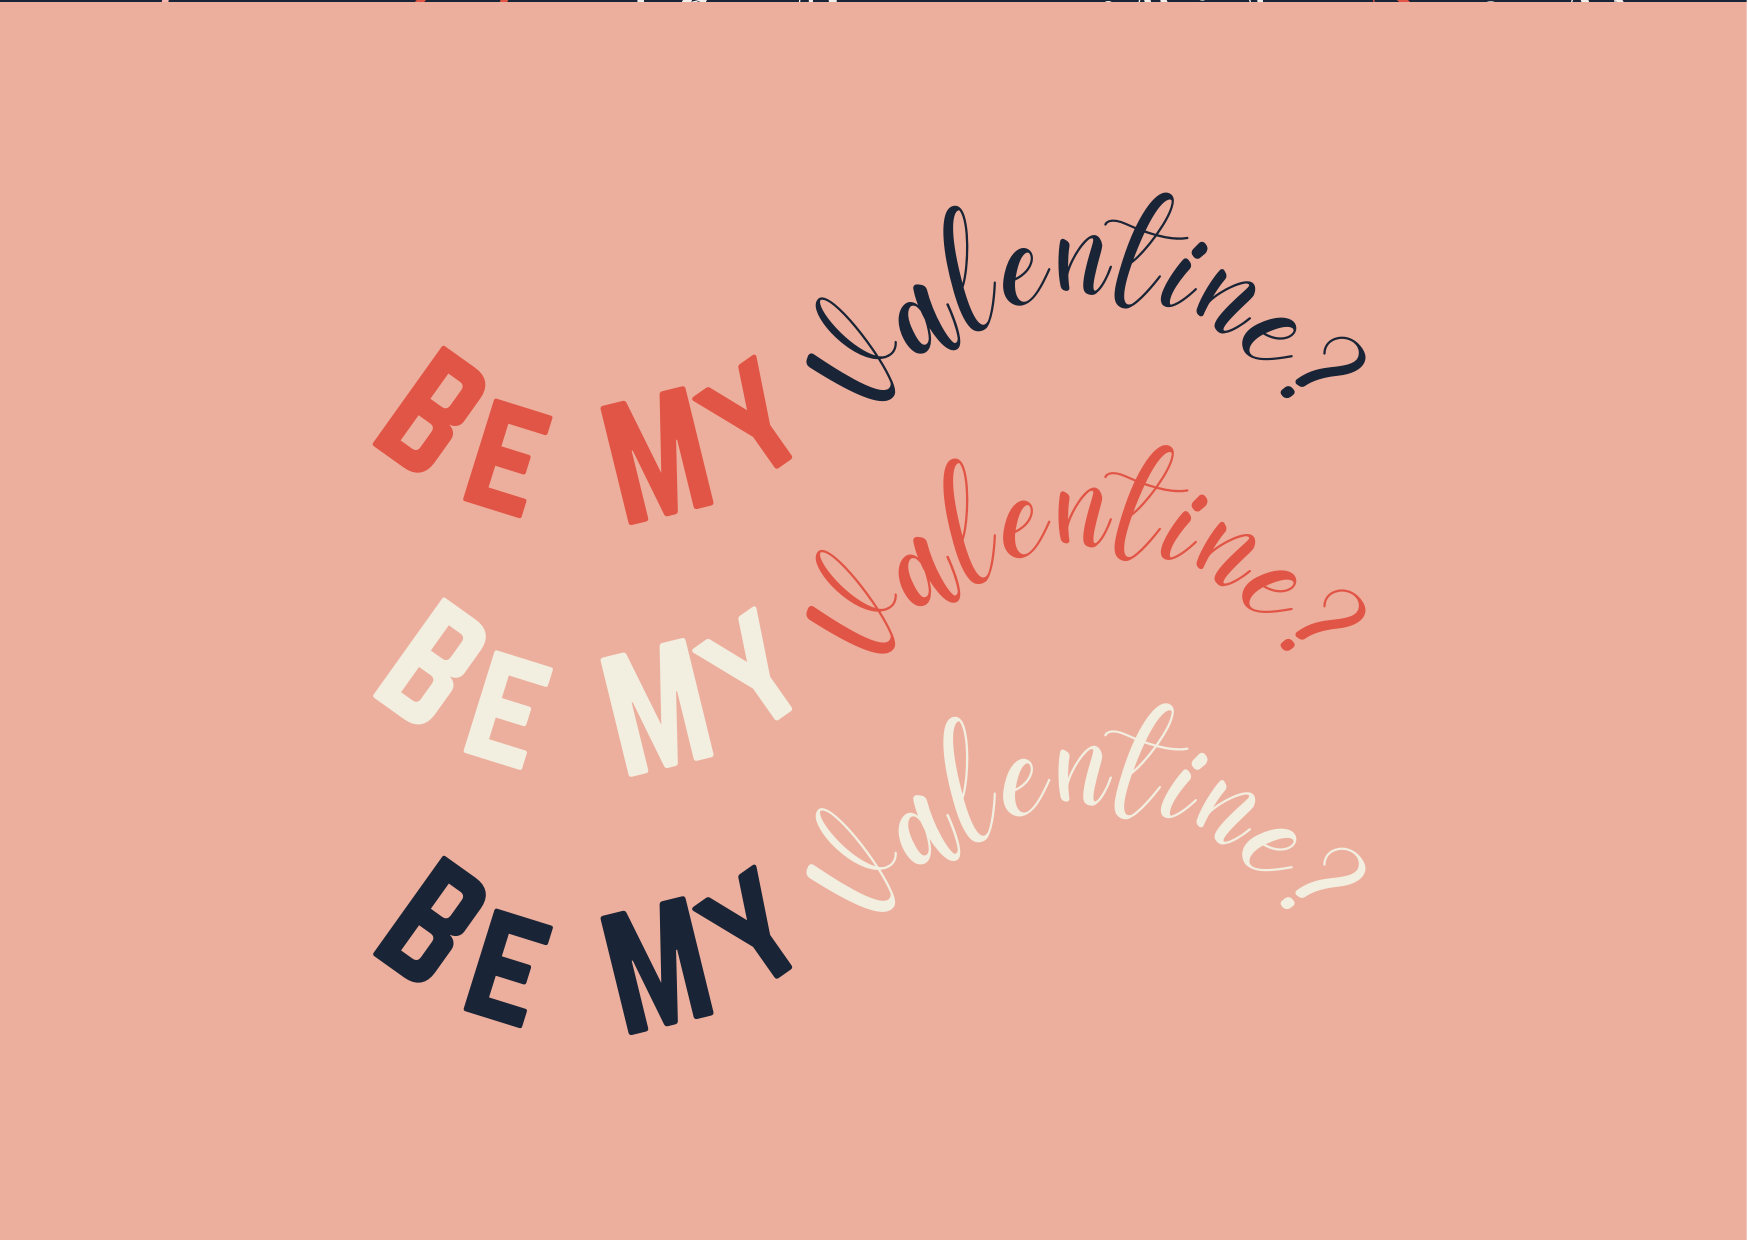 So modern and creative font for Valentine’s Day Cards.